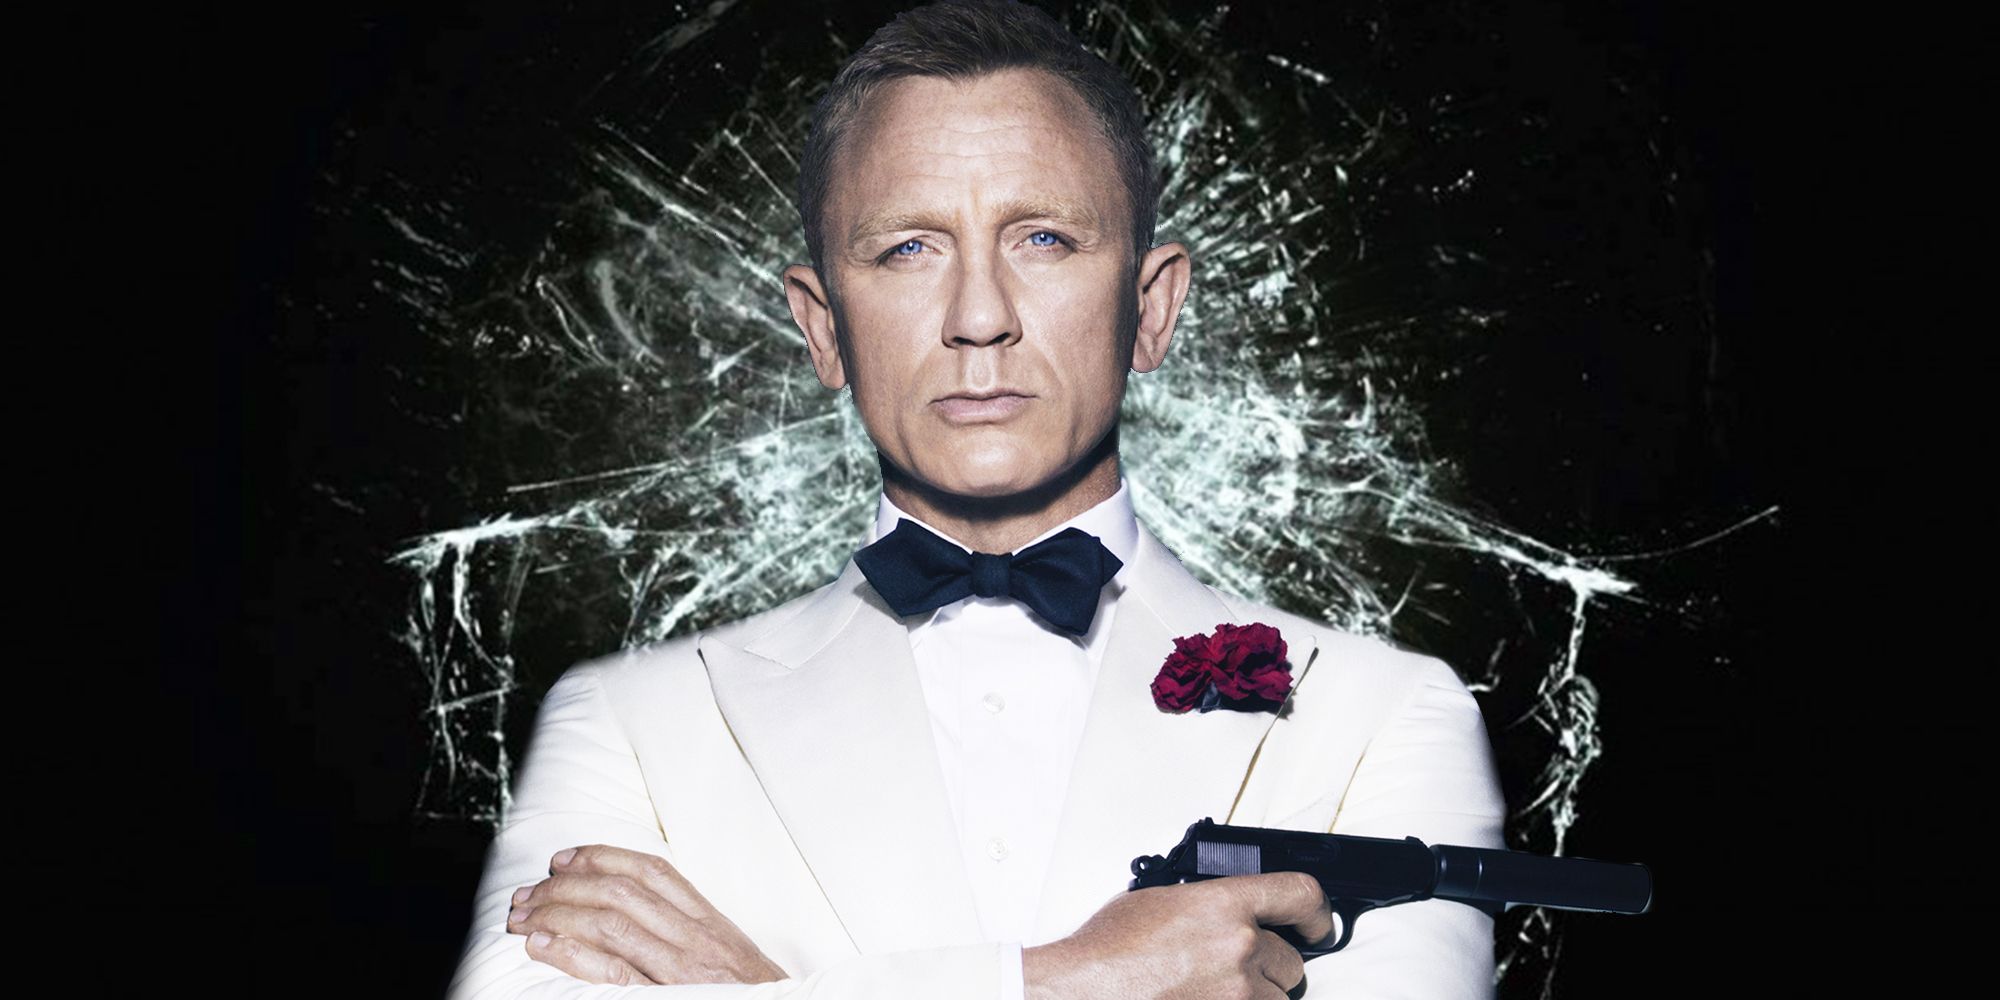 Why Casino Royale Director Was Unsure About Casting Daniel Craig As Bond